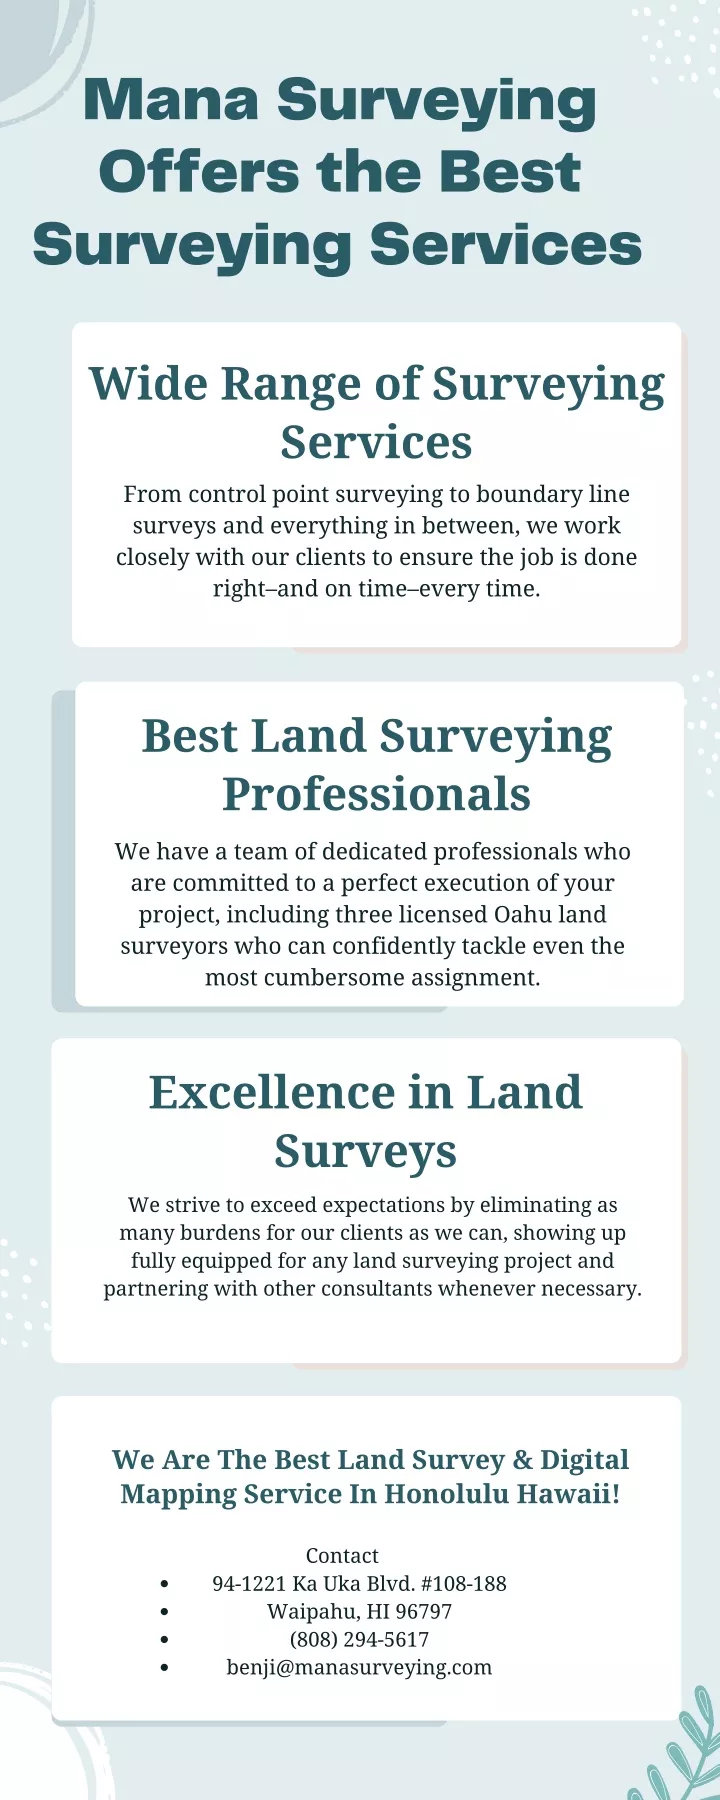 mana surveying offers the best surveying services